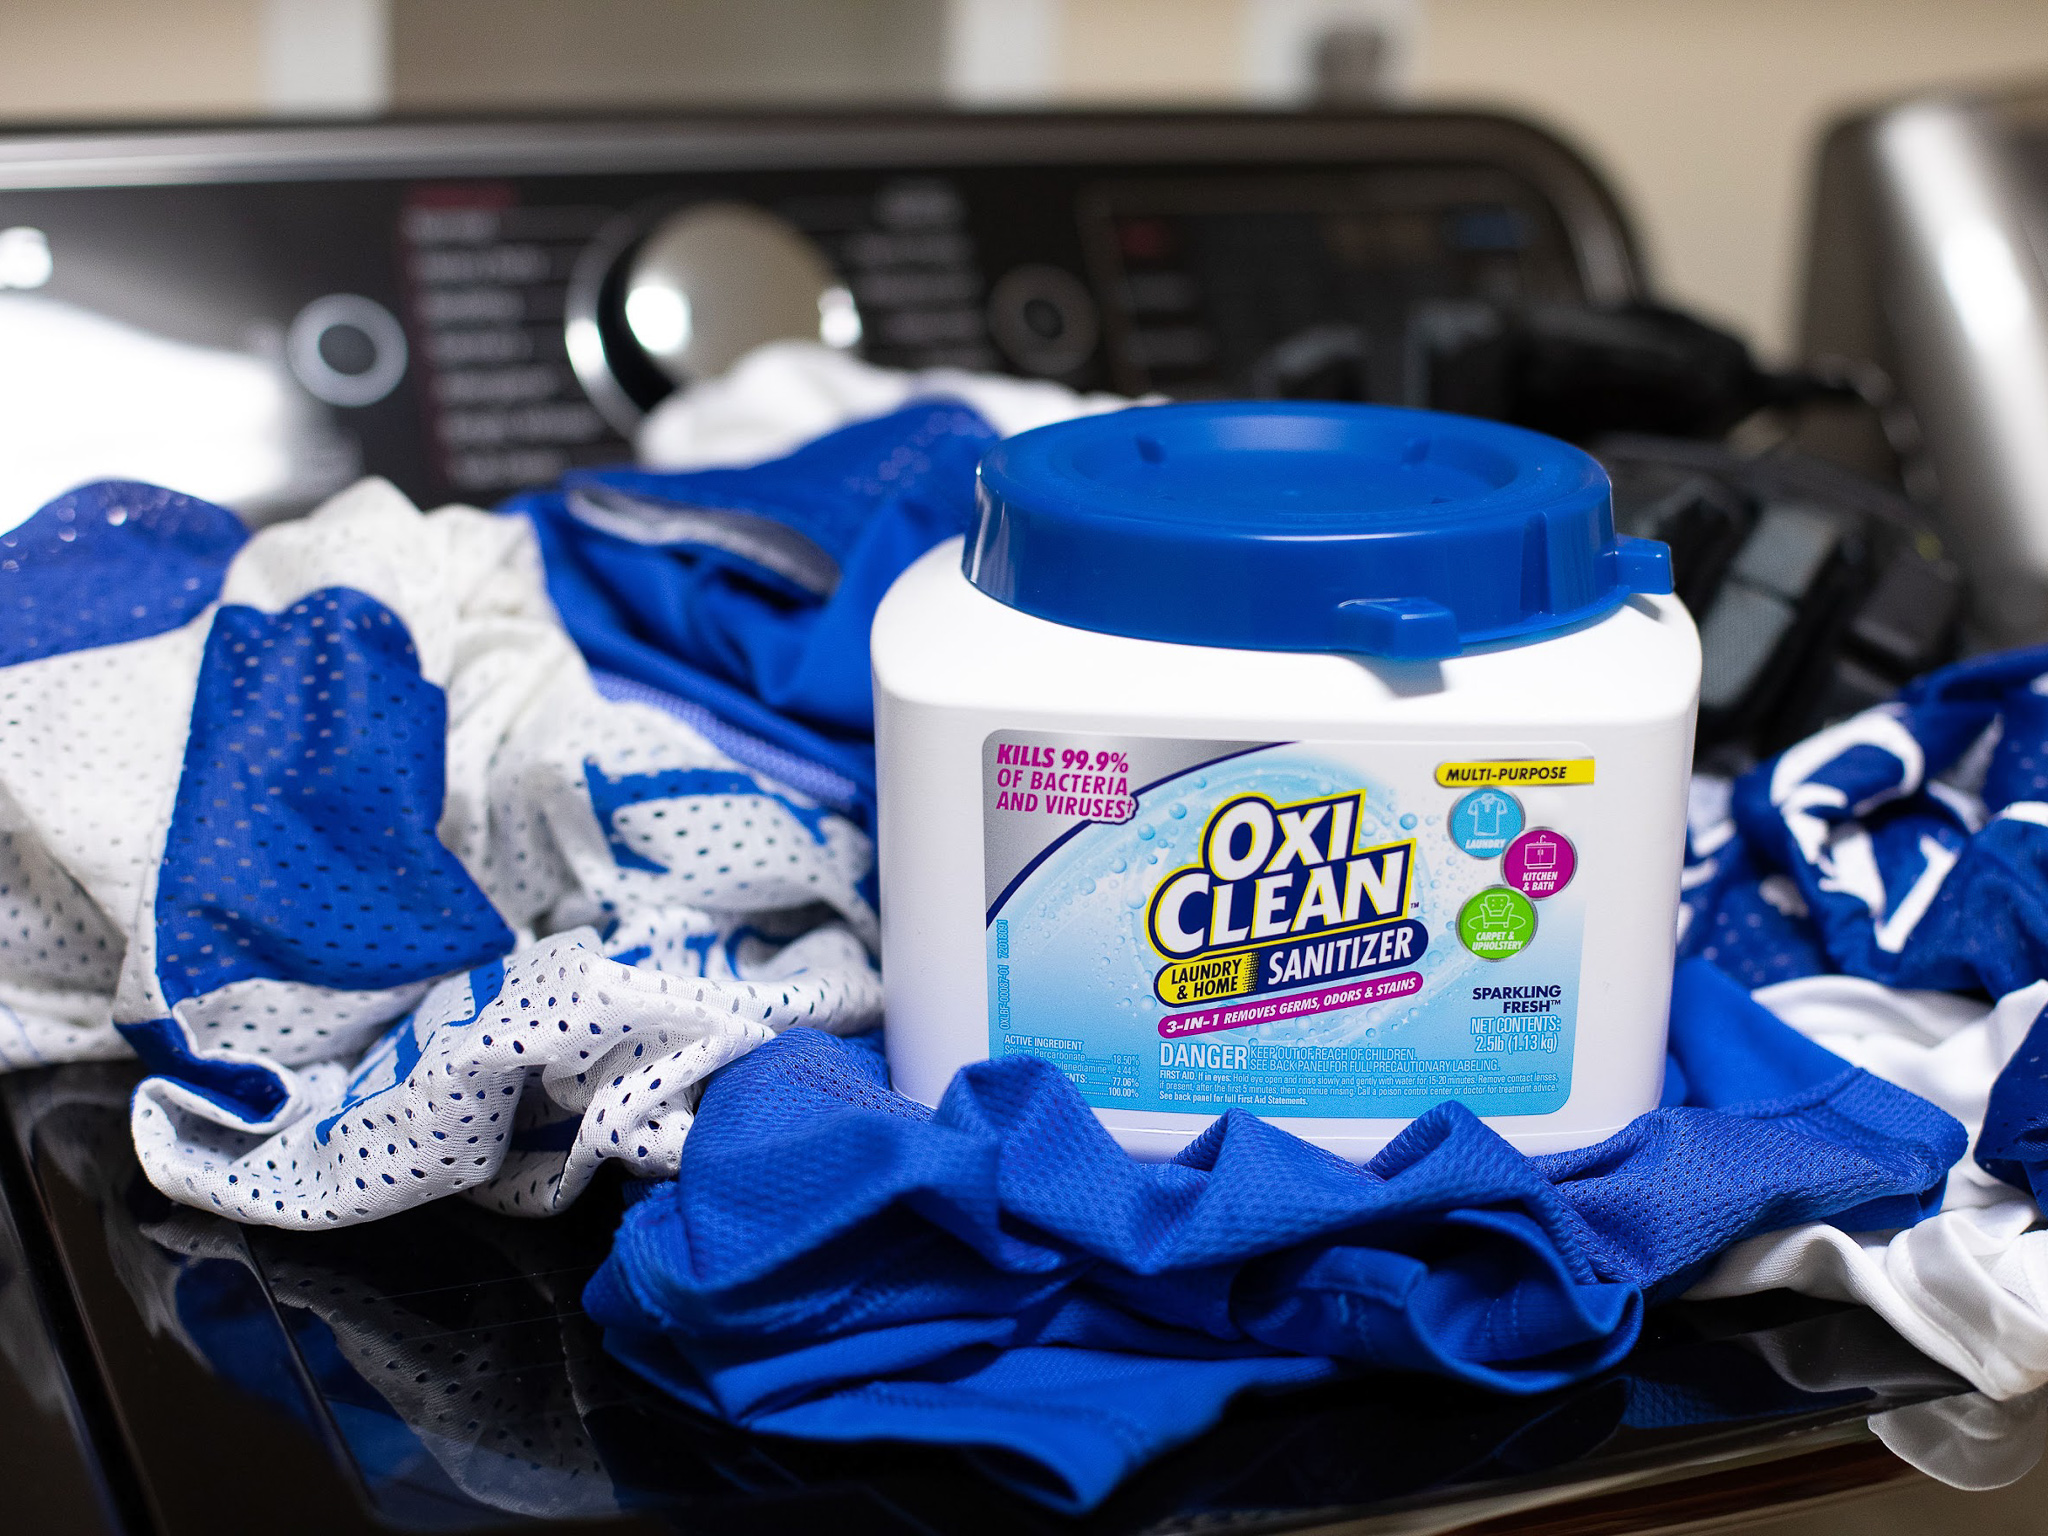 Try New OxiClean™ Laundry & Home Sanitizer And Get Things Clean, Clean! on I Heart Publix 1